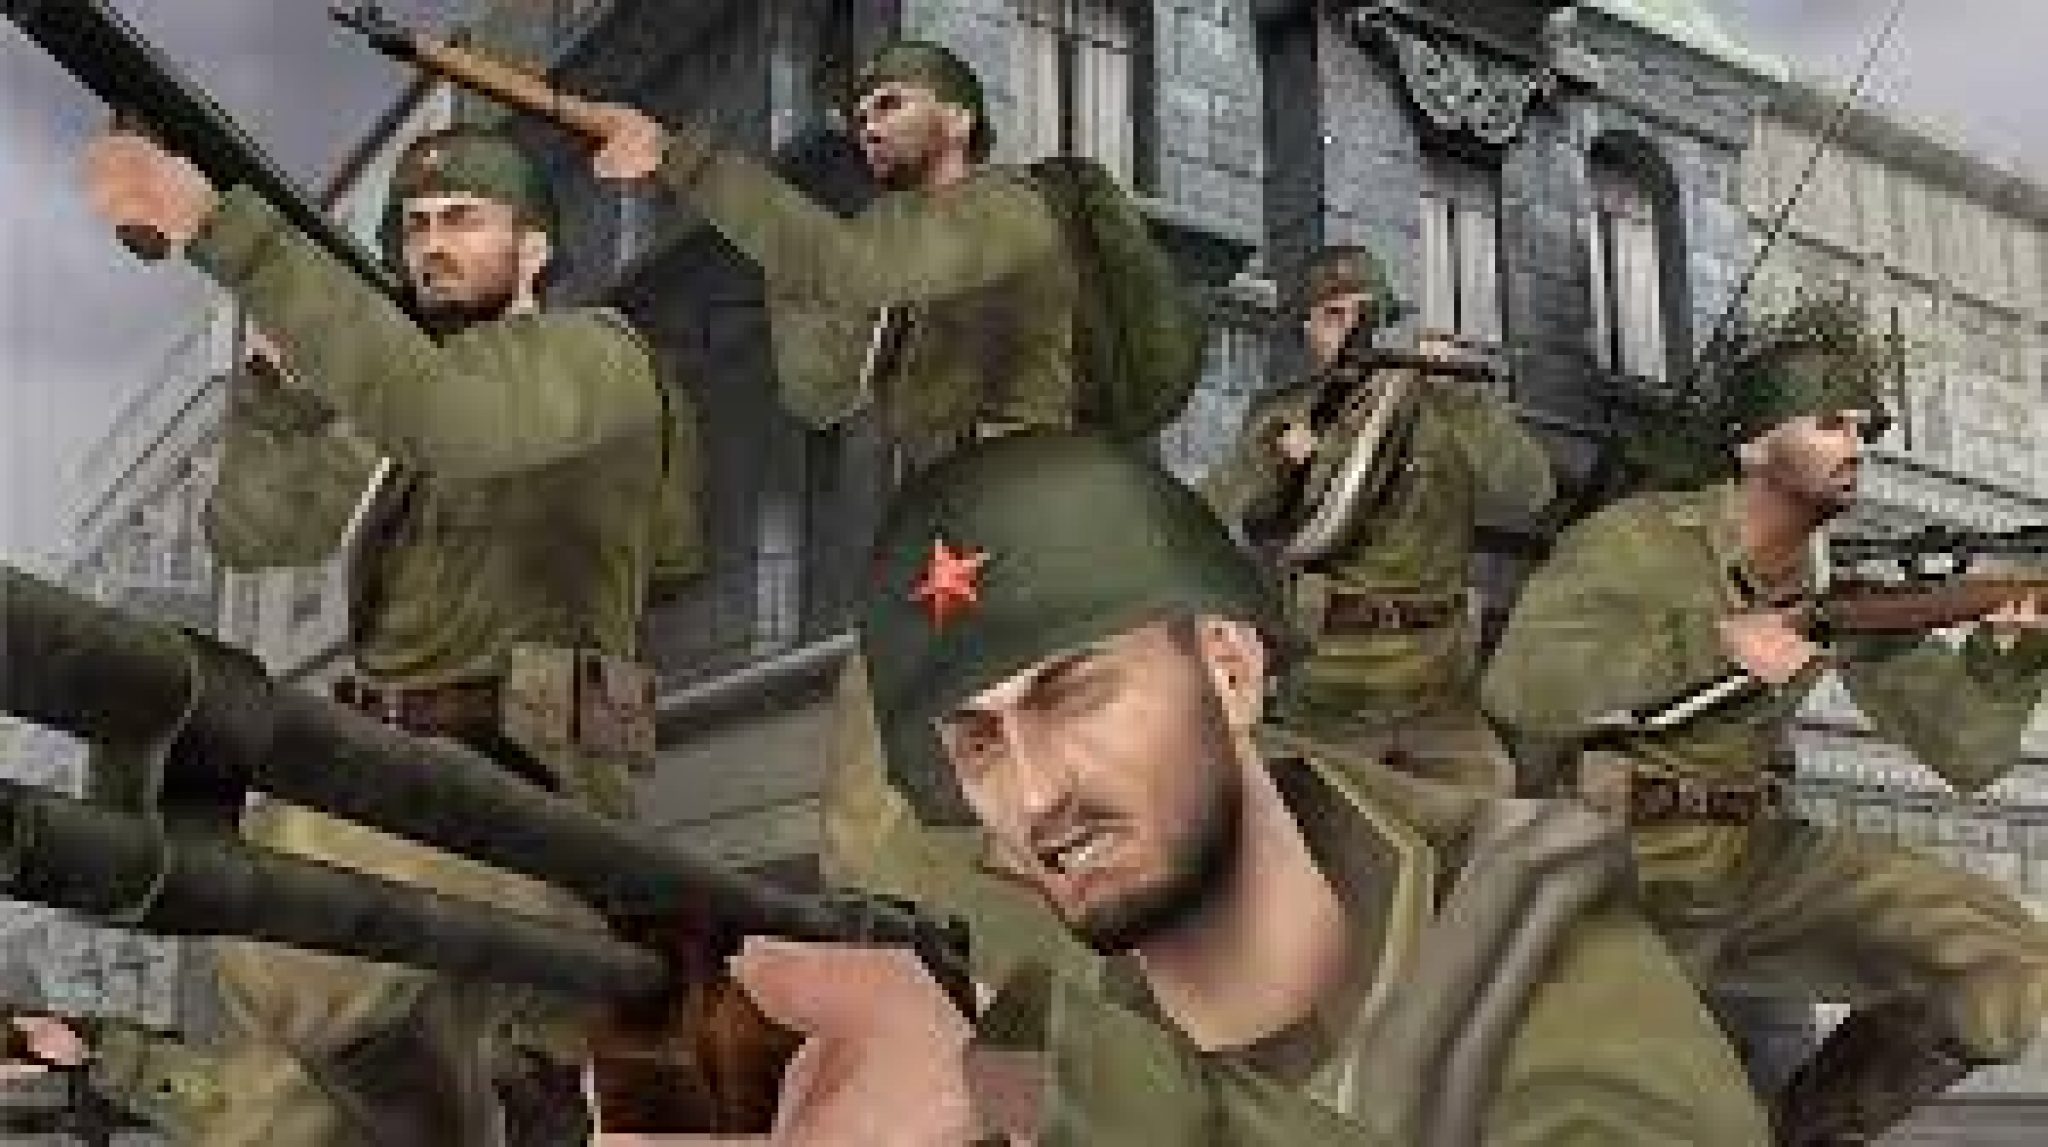 battlefield 1942 download full game free pc